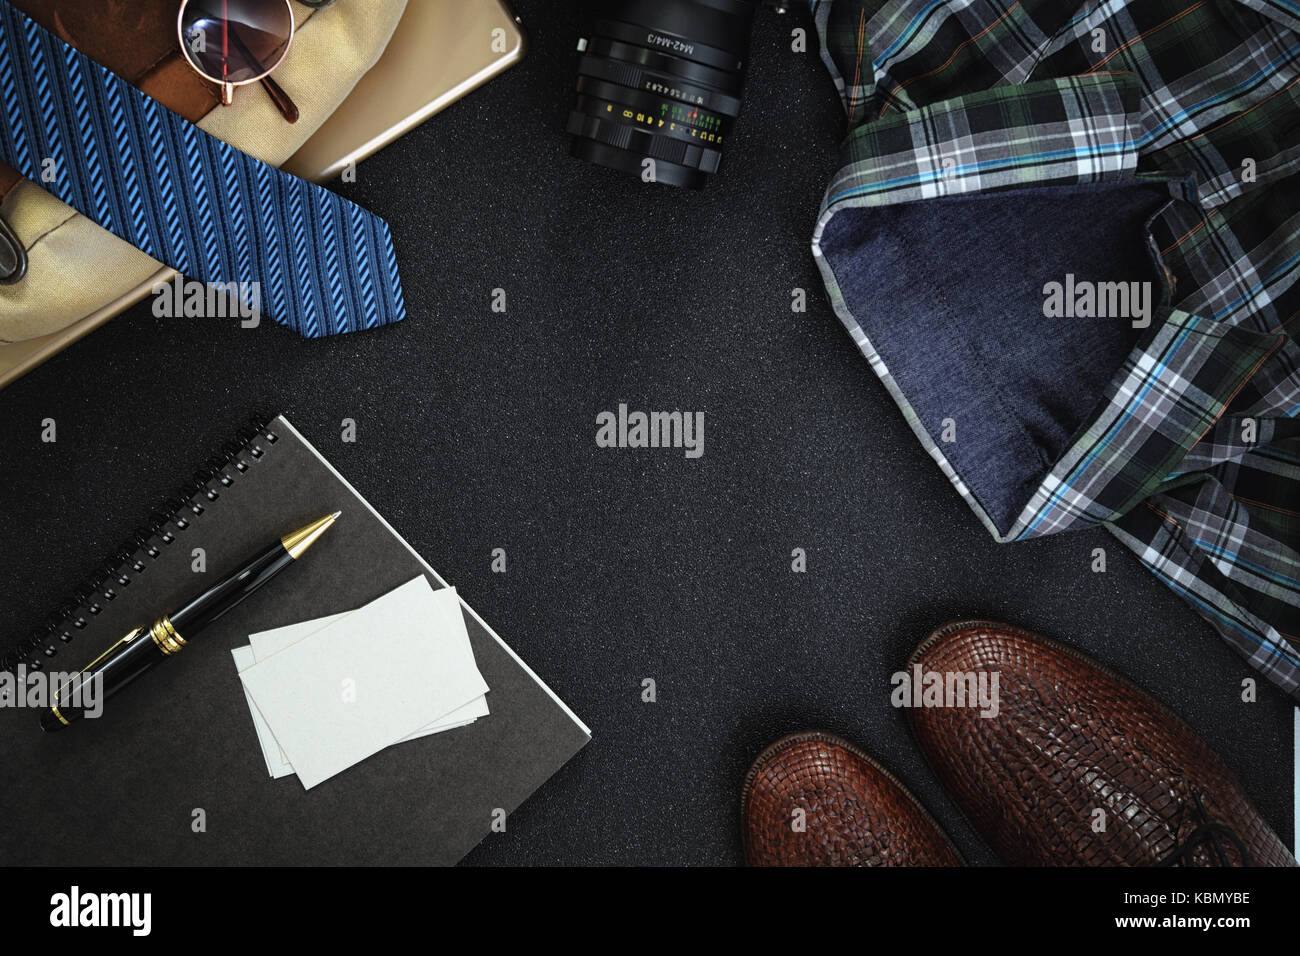 Men Clothing and Accessories shoes, glasses, shirt and name card on dark background. Top view with copy space Stock Photo